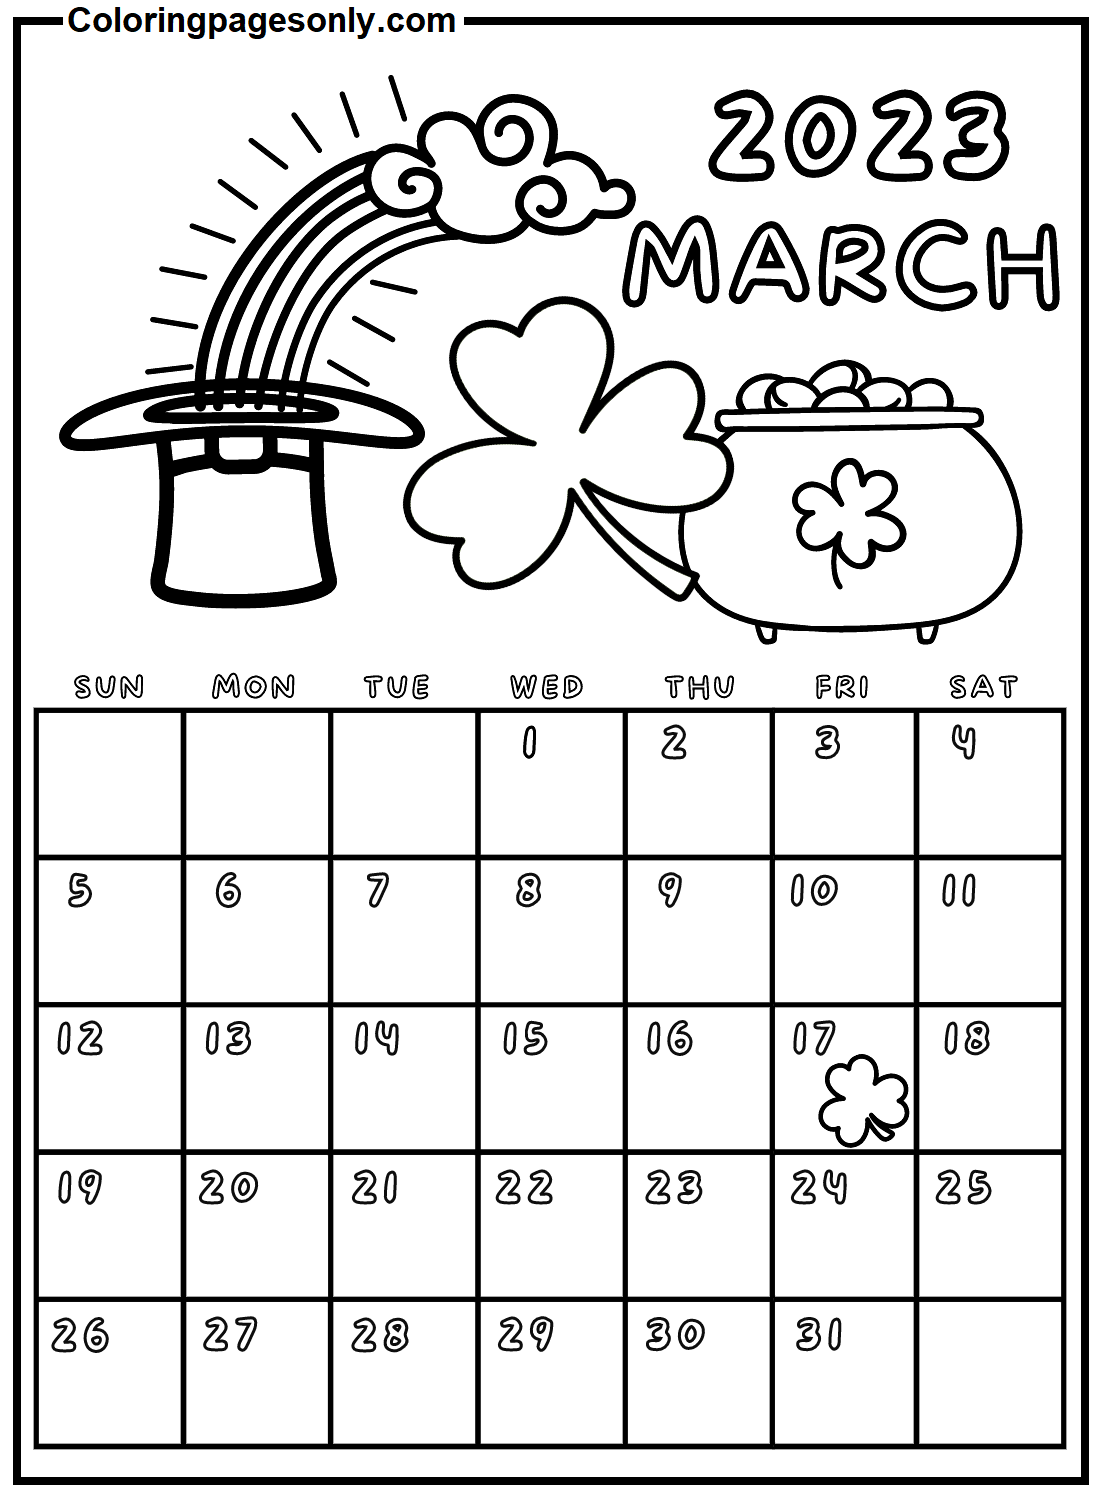 Free March 2023 Calendar Coloring Page